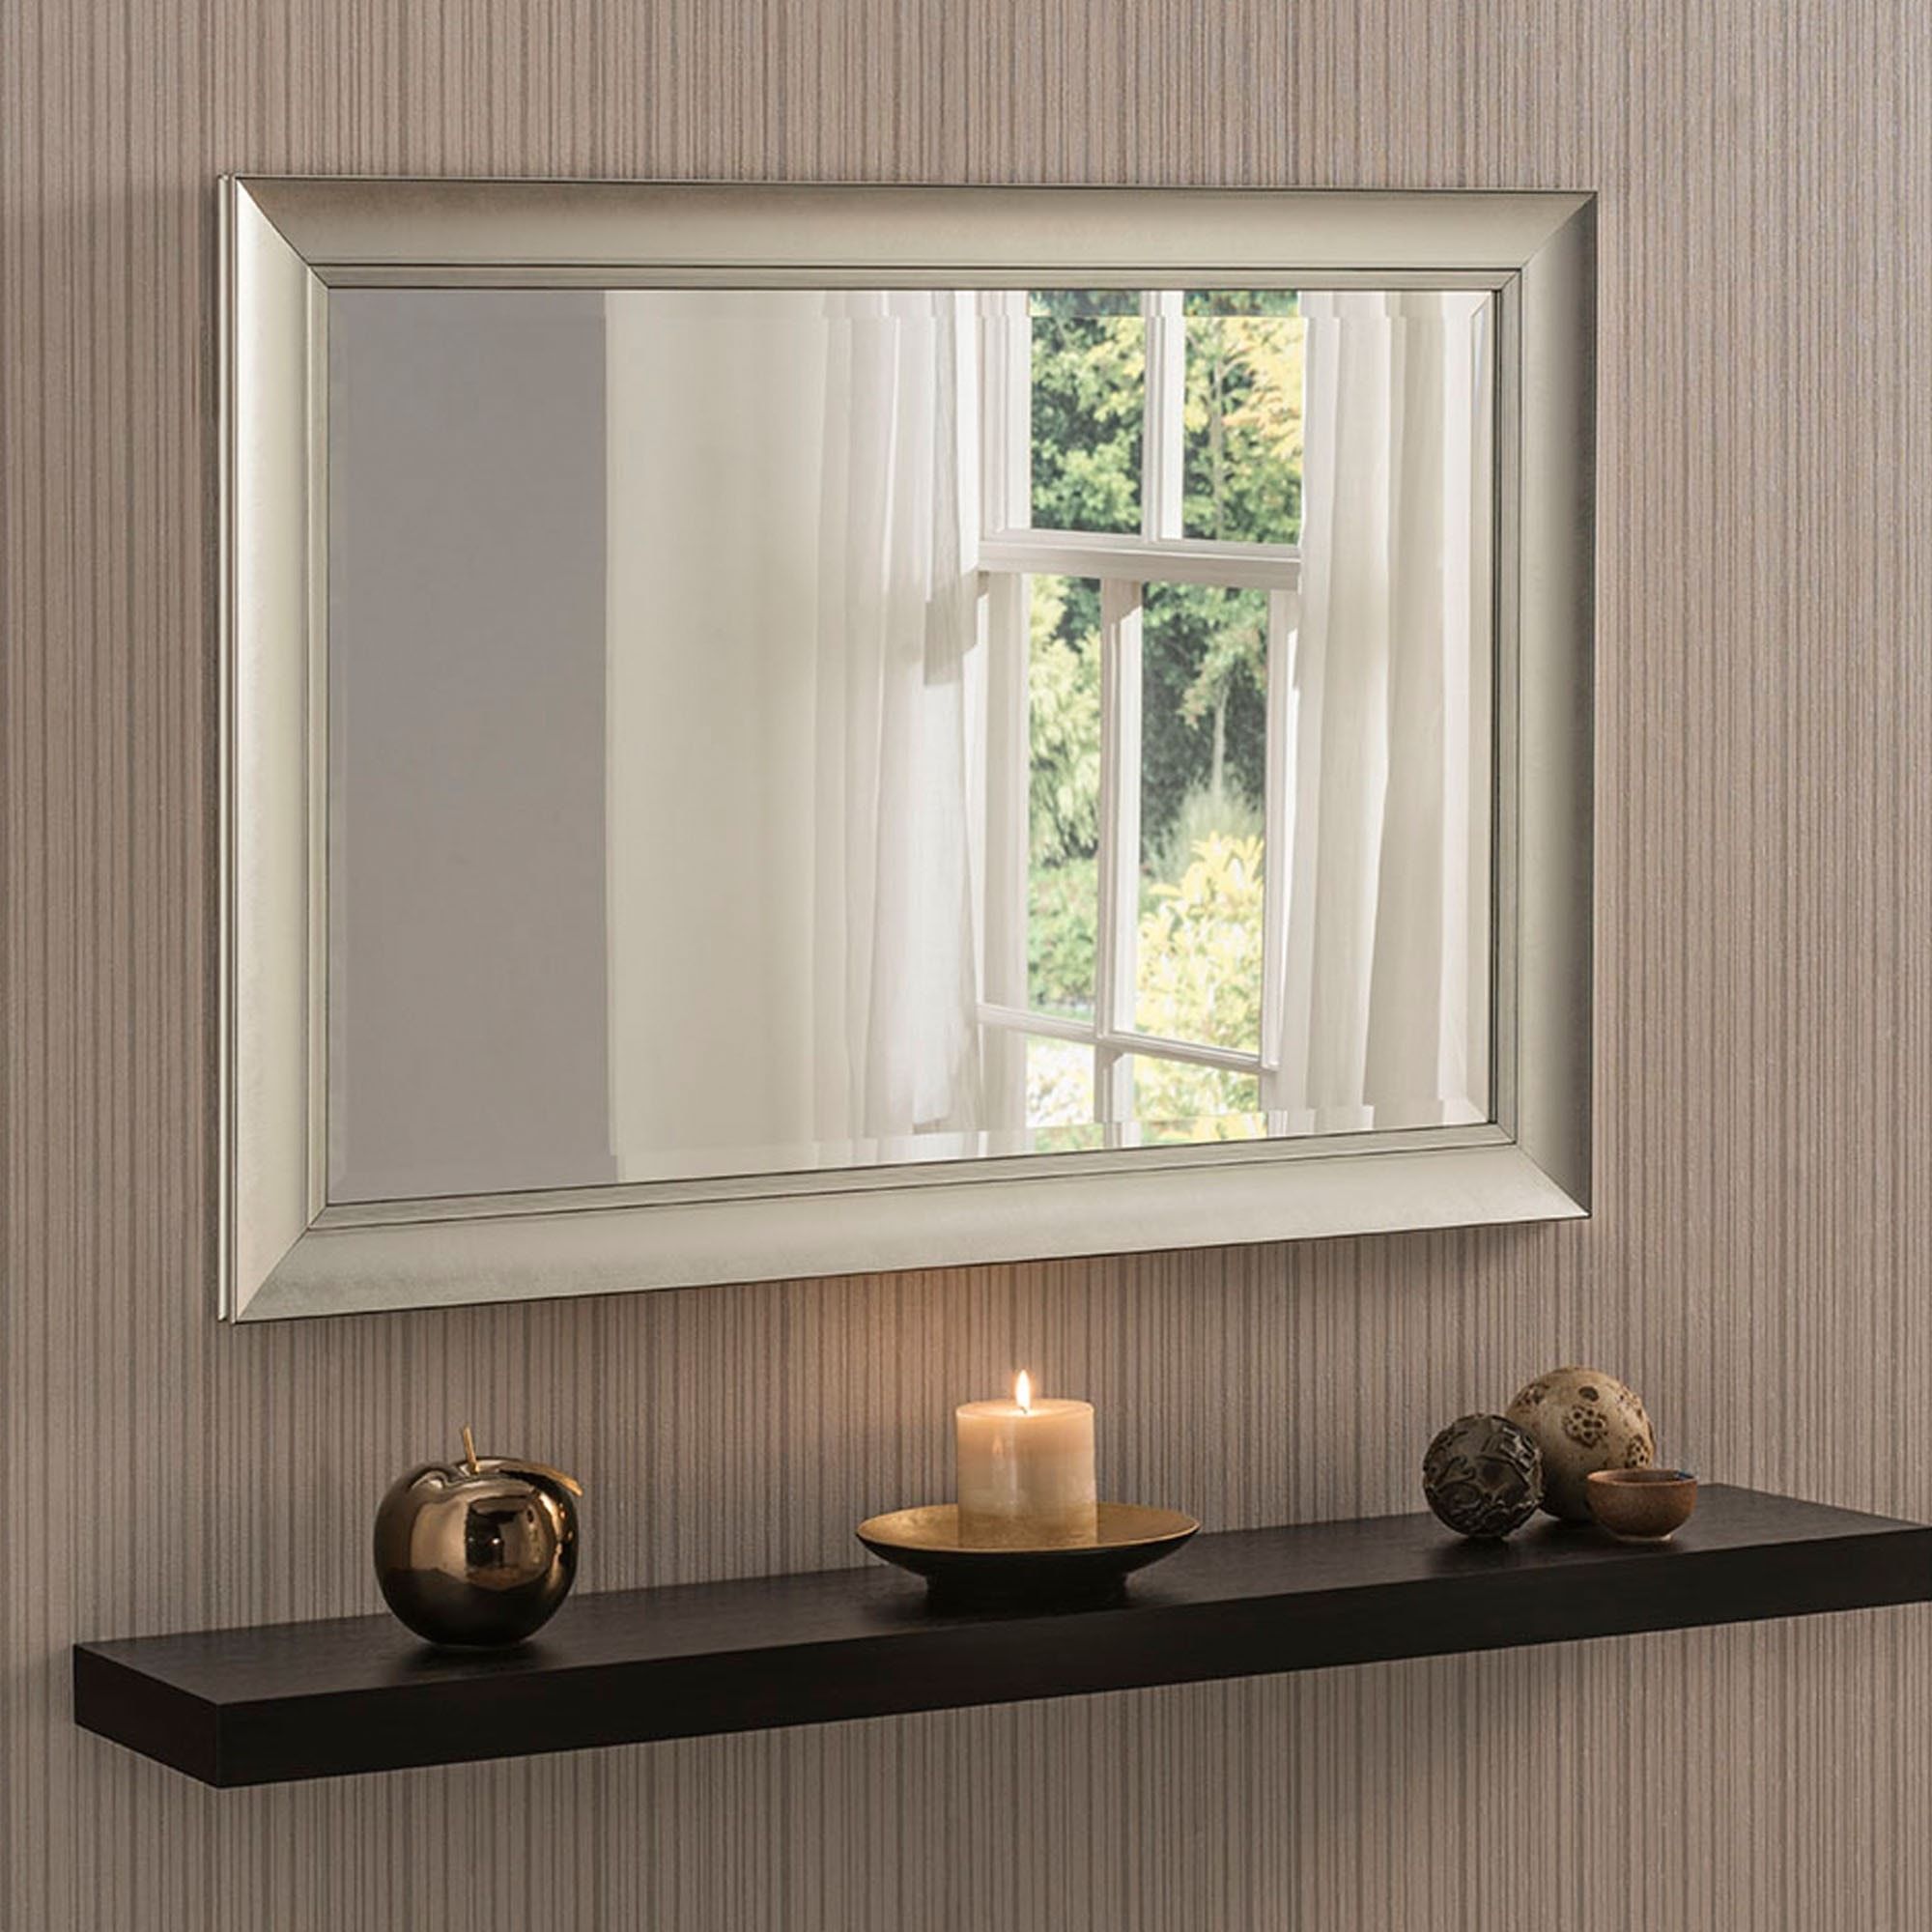 Contemporary Silver Beveled Wall Mirror | Wall Mirrors In Silver Metal Cut Edge Wall Mirrors (View 15 of 15)